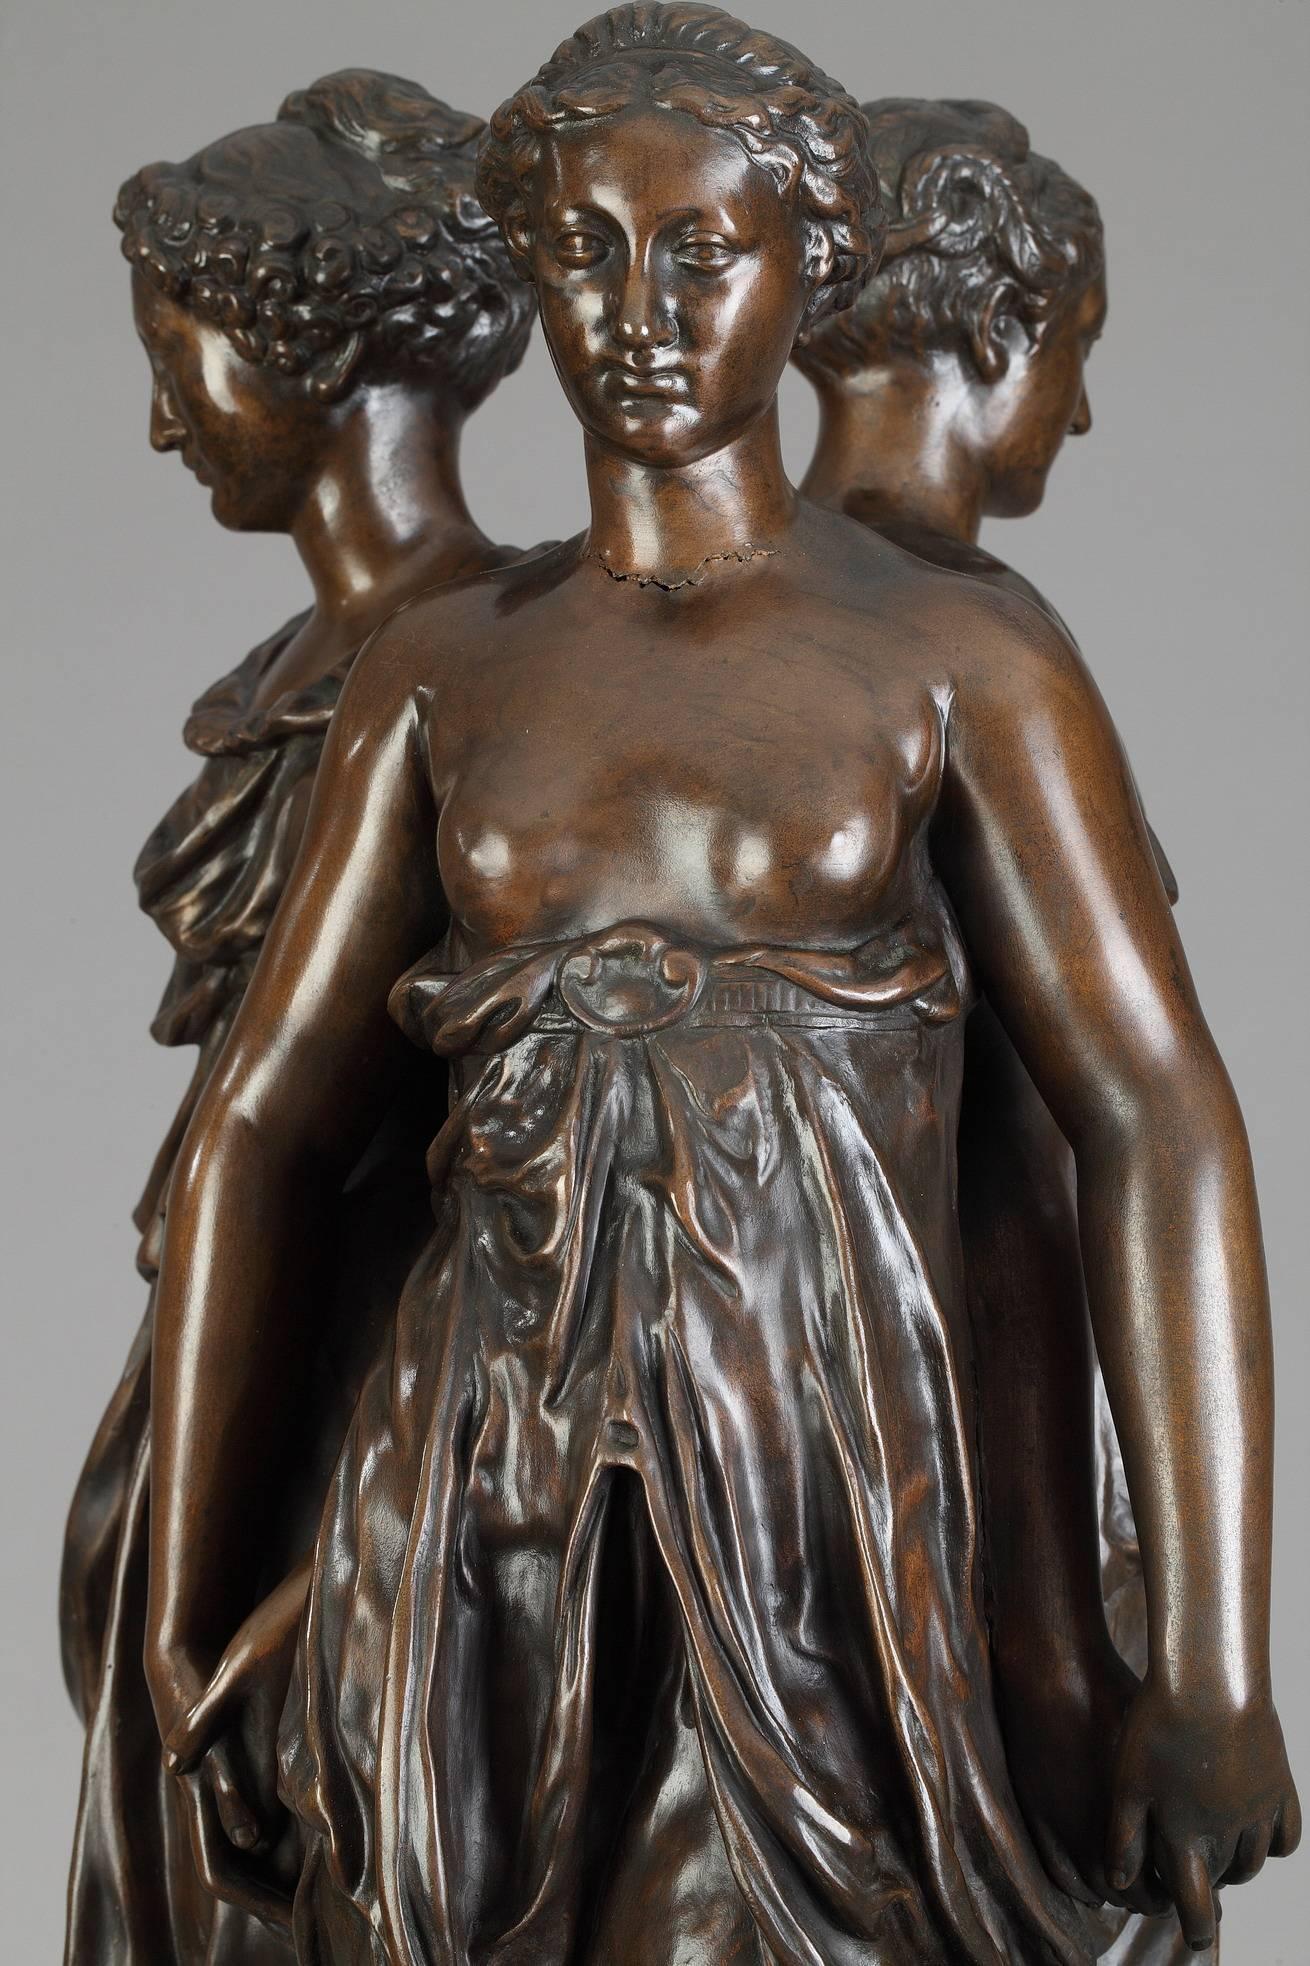 Large patinated bronze group of the Three Graces after Germain Pilon (Paris, 1528-1590). It features three young women standing back to back with their hands clasped seem to be slowly performing a round dance. The theme, the light tunics, the